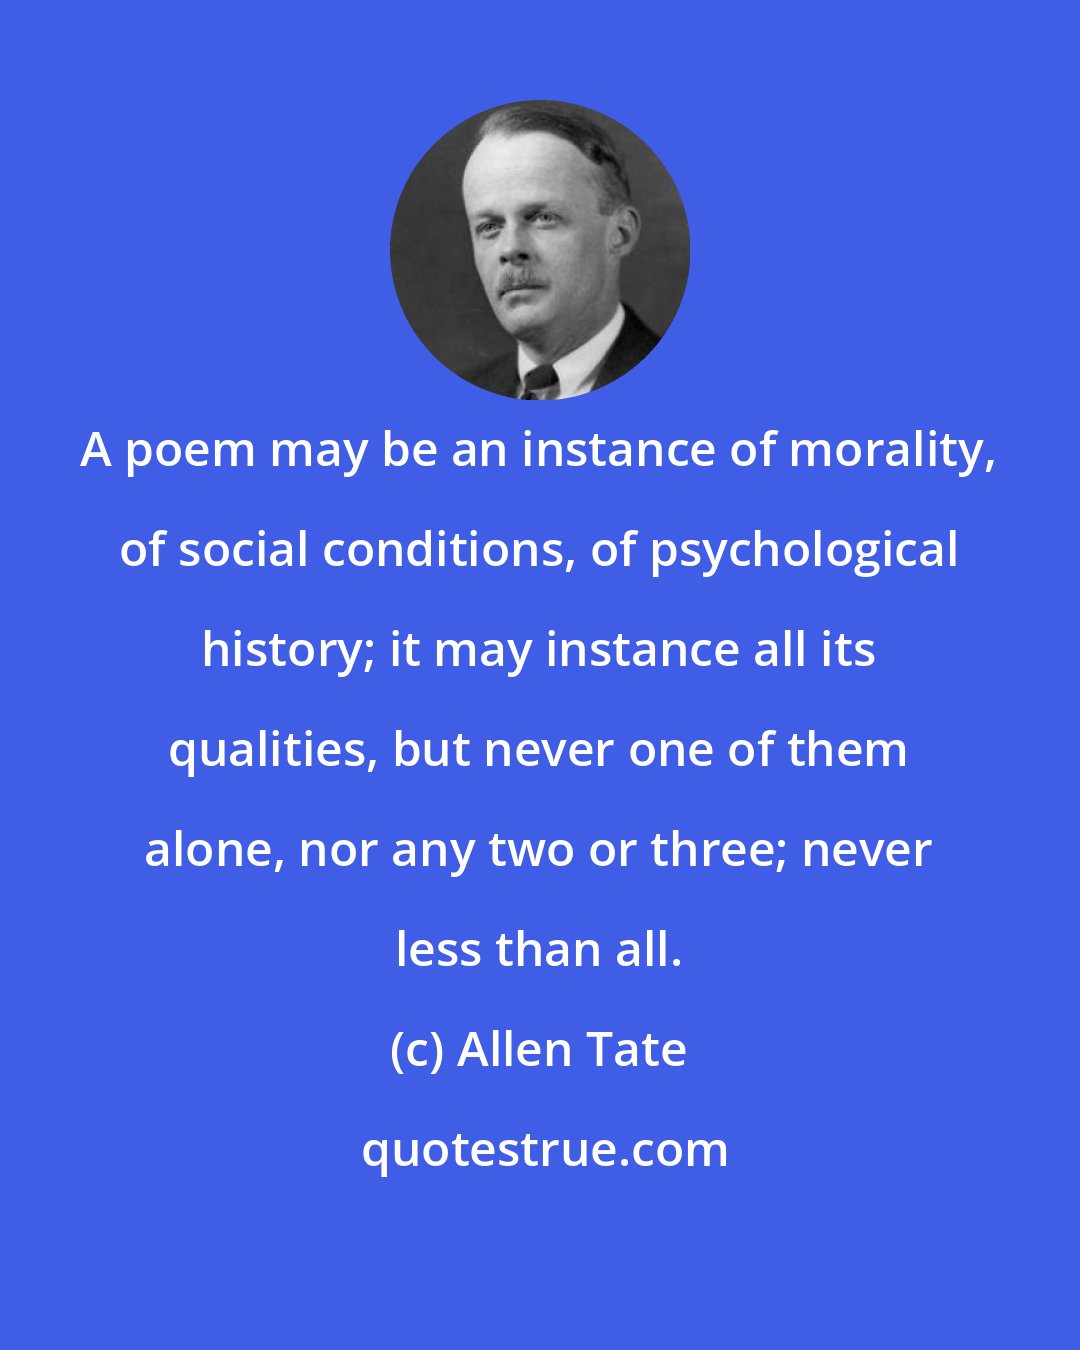 Allen Tate: A poem may be an instance of morality, of social conditions, of psychological history; it may instance all its qualities, but never one of them alone, nor any two or three; never less than all.